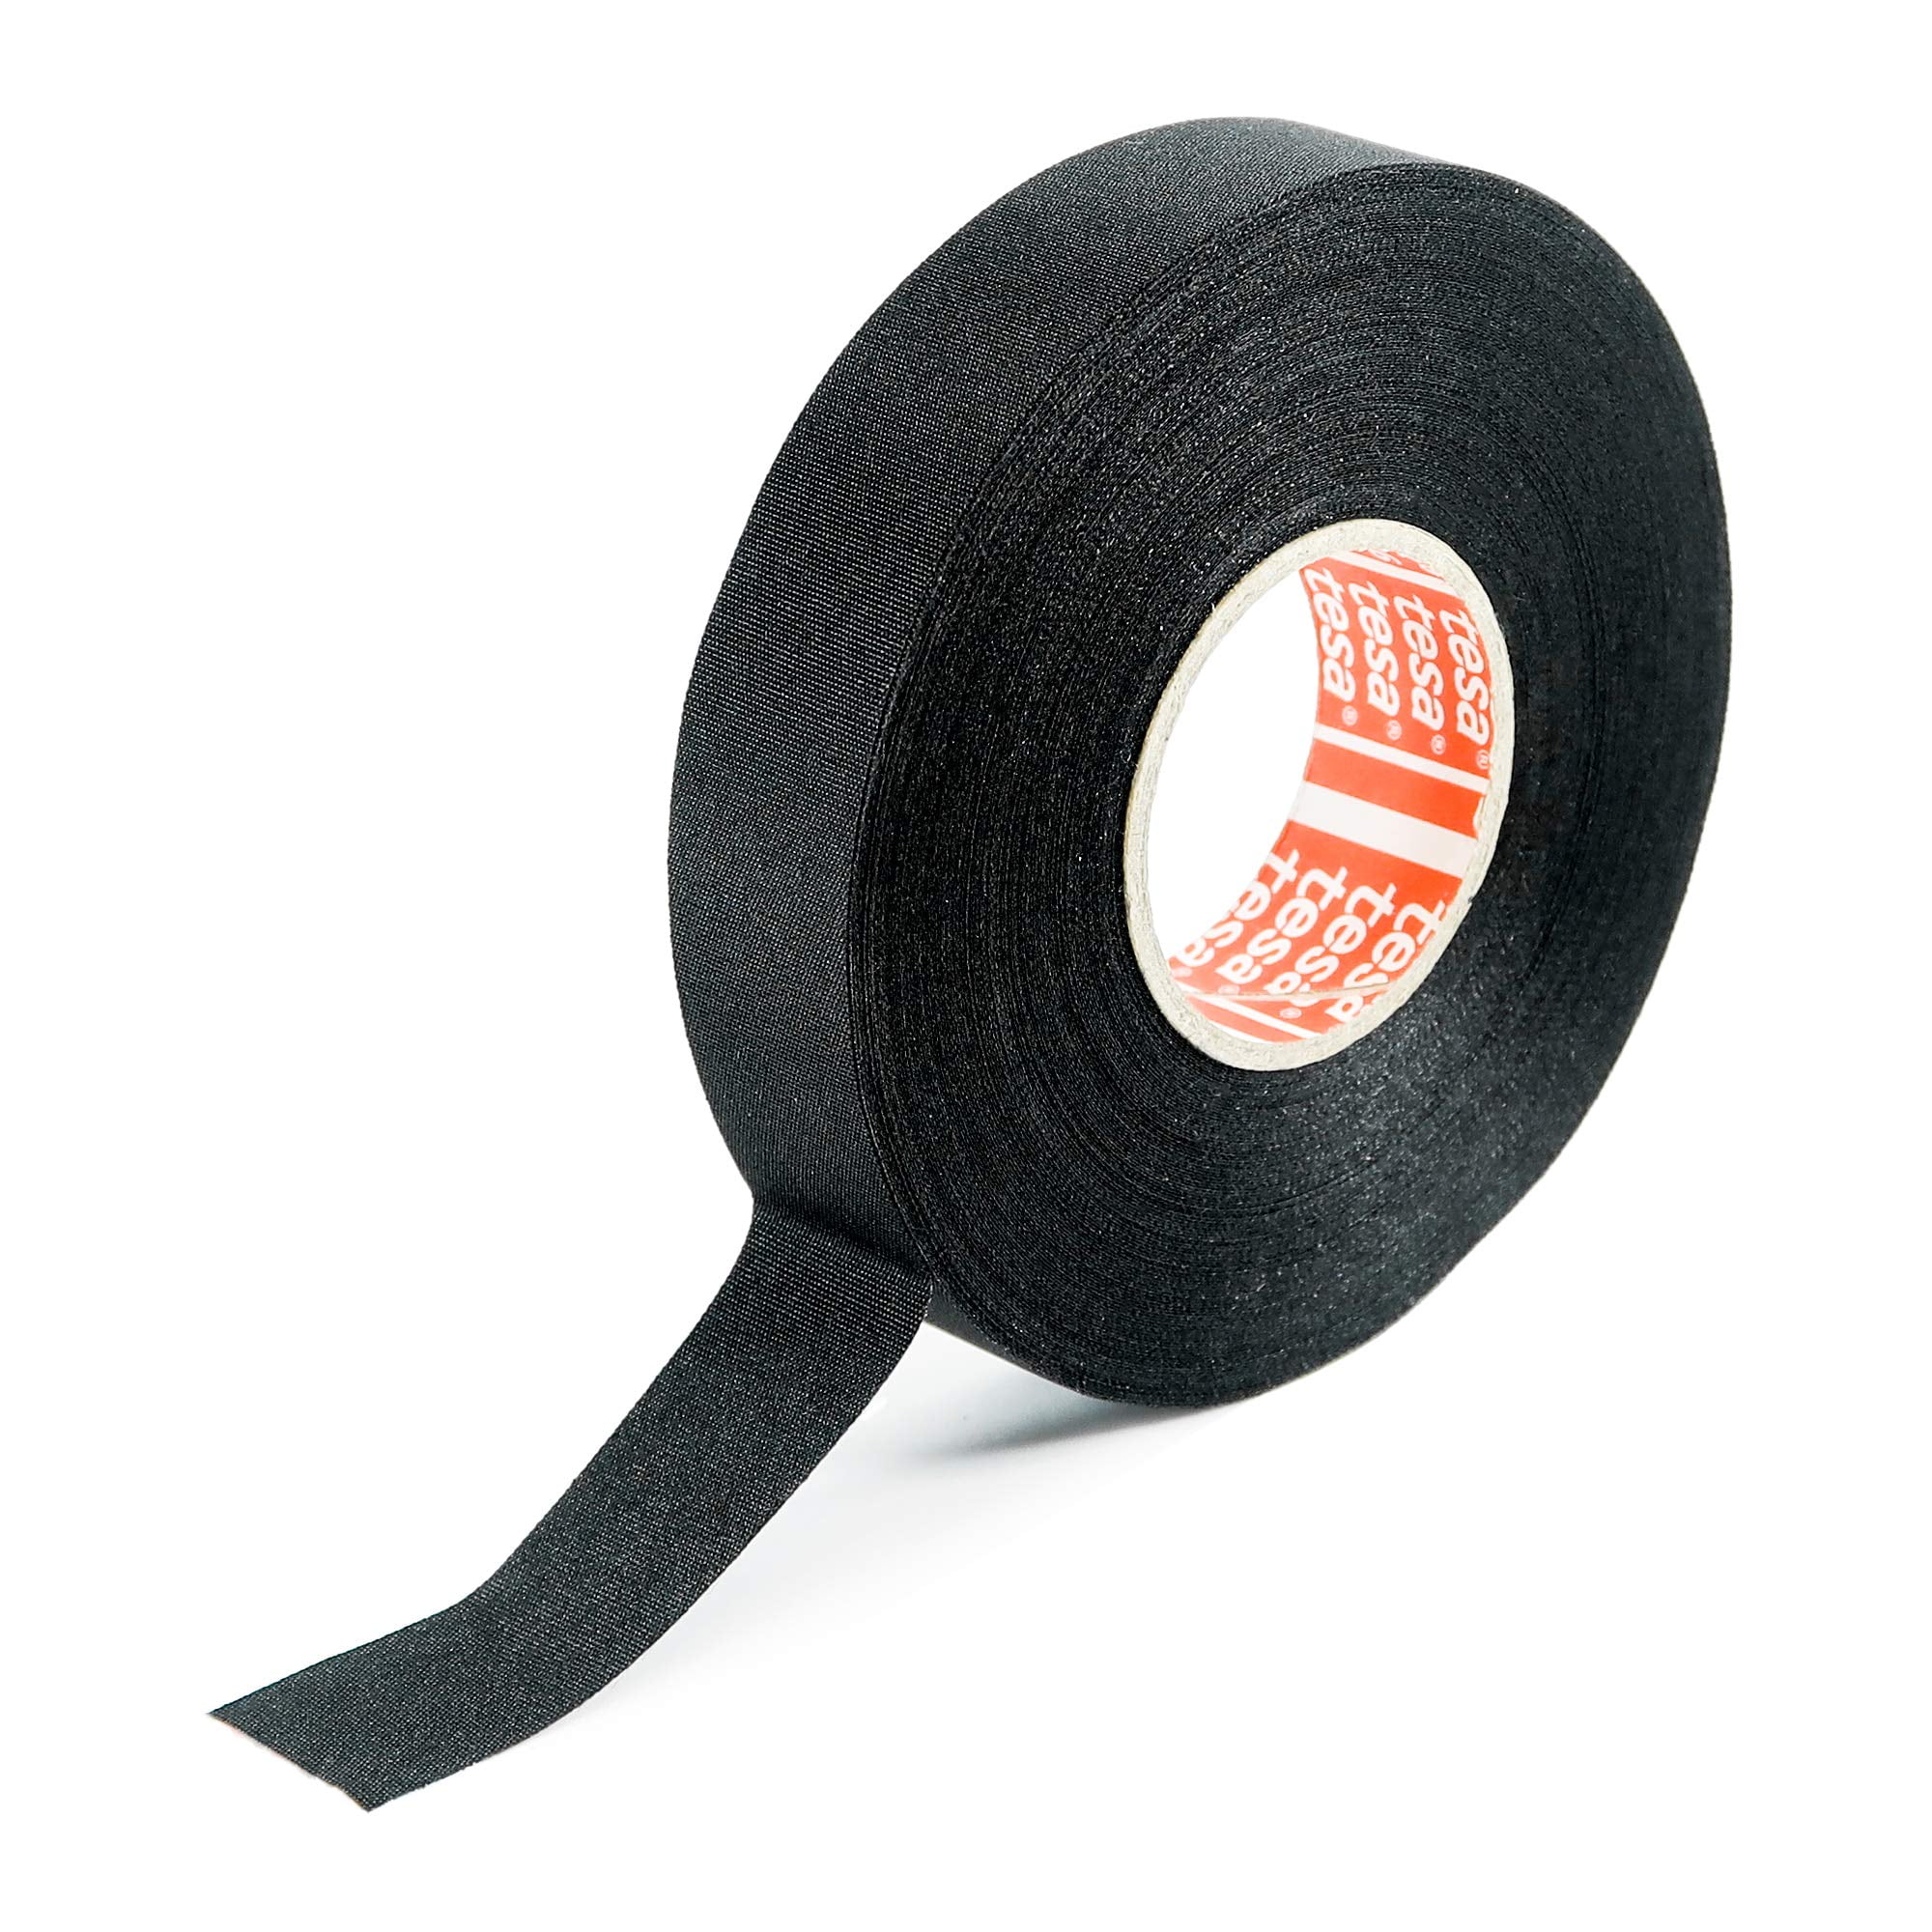 1 Roll Wire Harness Fuzzy Fleece Cloth Tape Noise Damping Adhesive Fabric  Tape